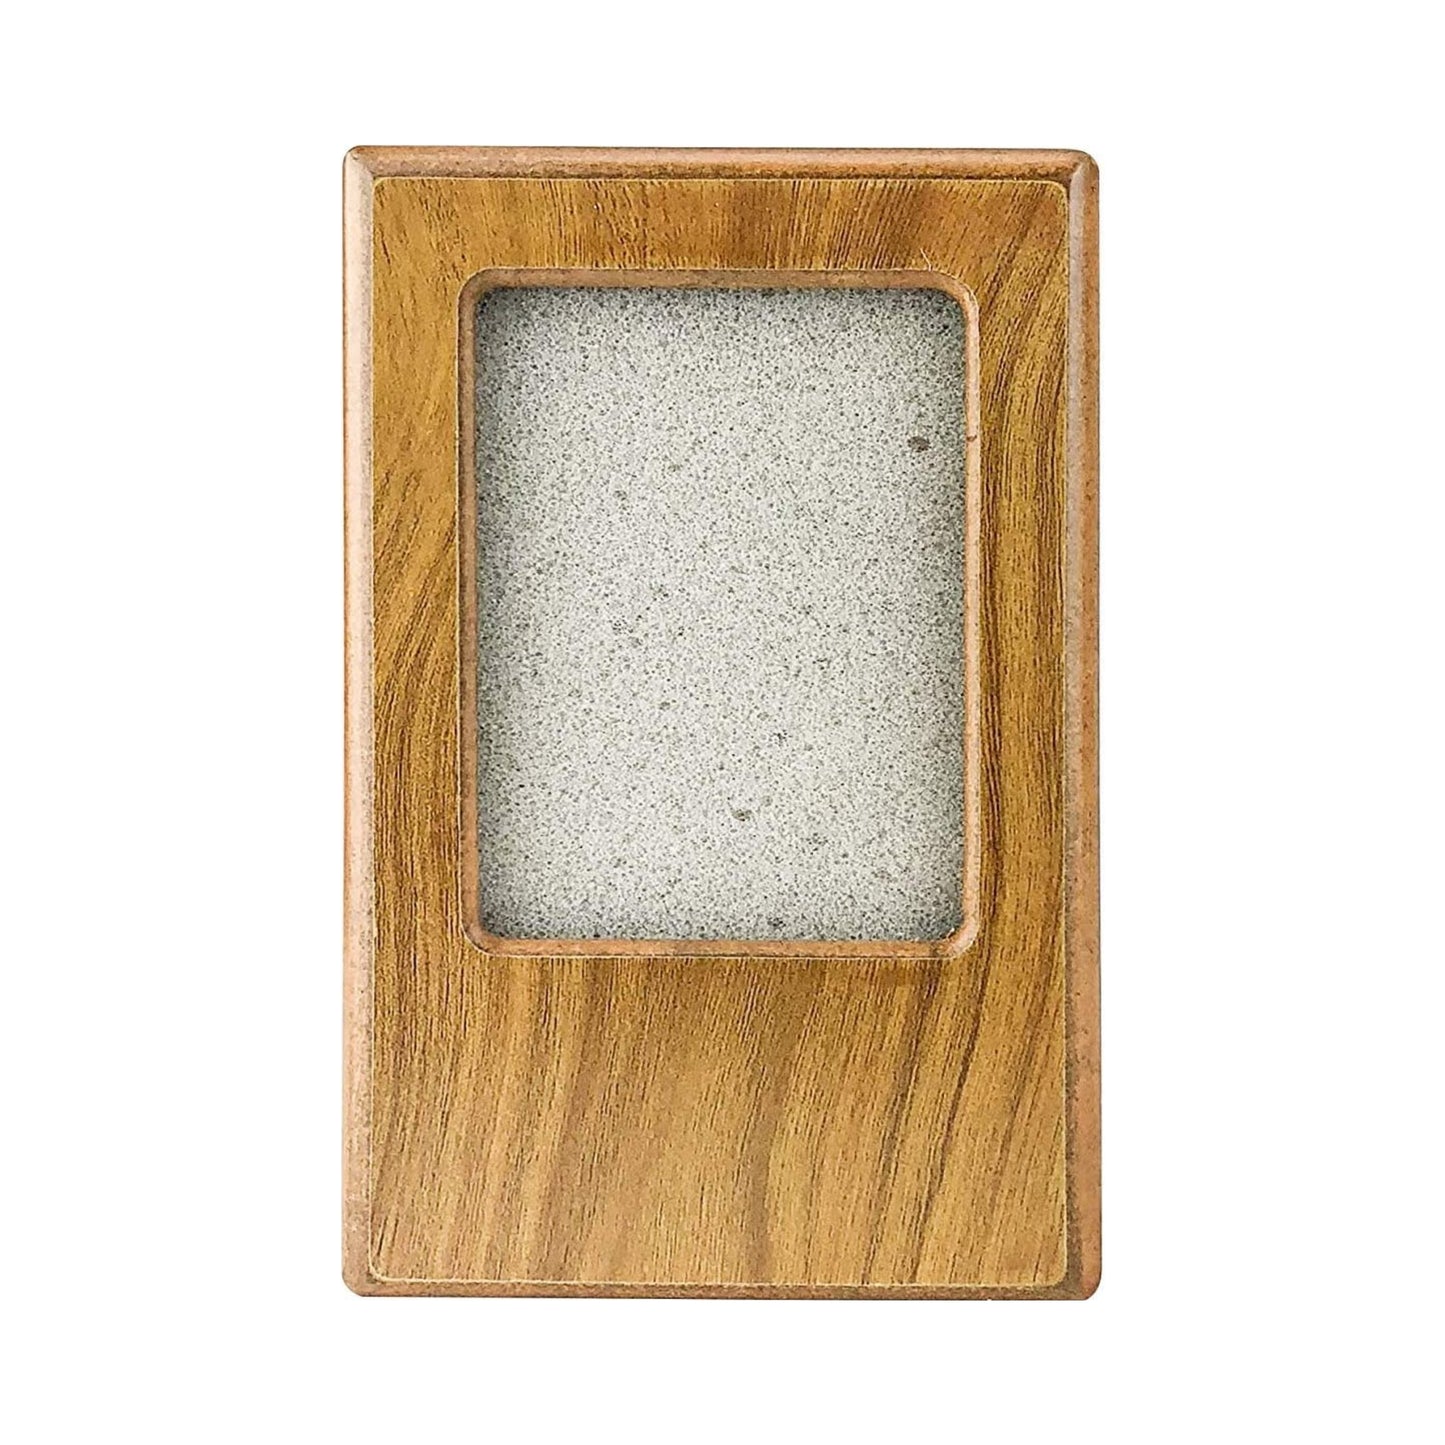 Midlee Oak Picture Frame Pet Urn 5.75" x 4" x 4.25", up to 30lbs Pet